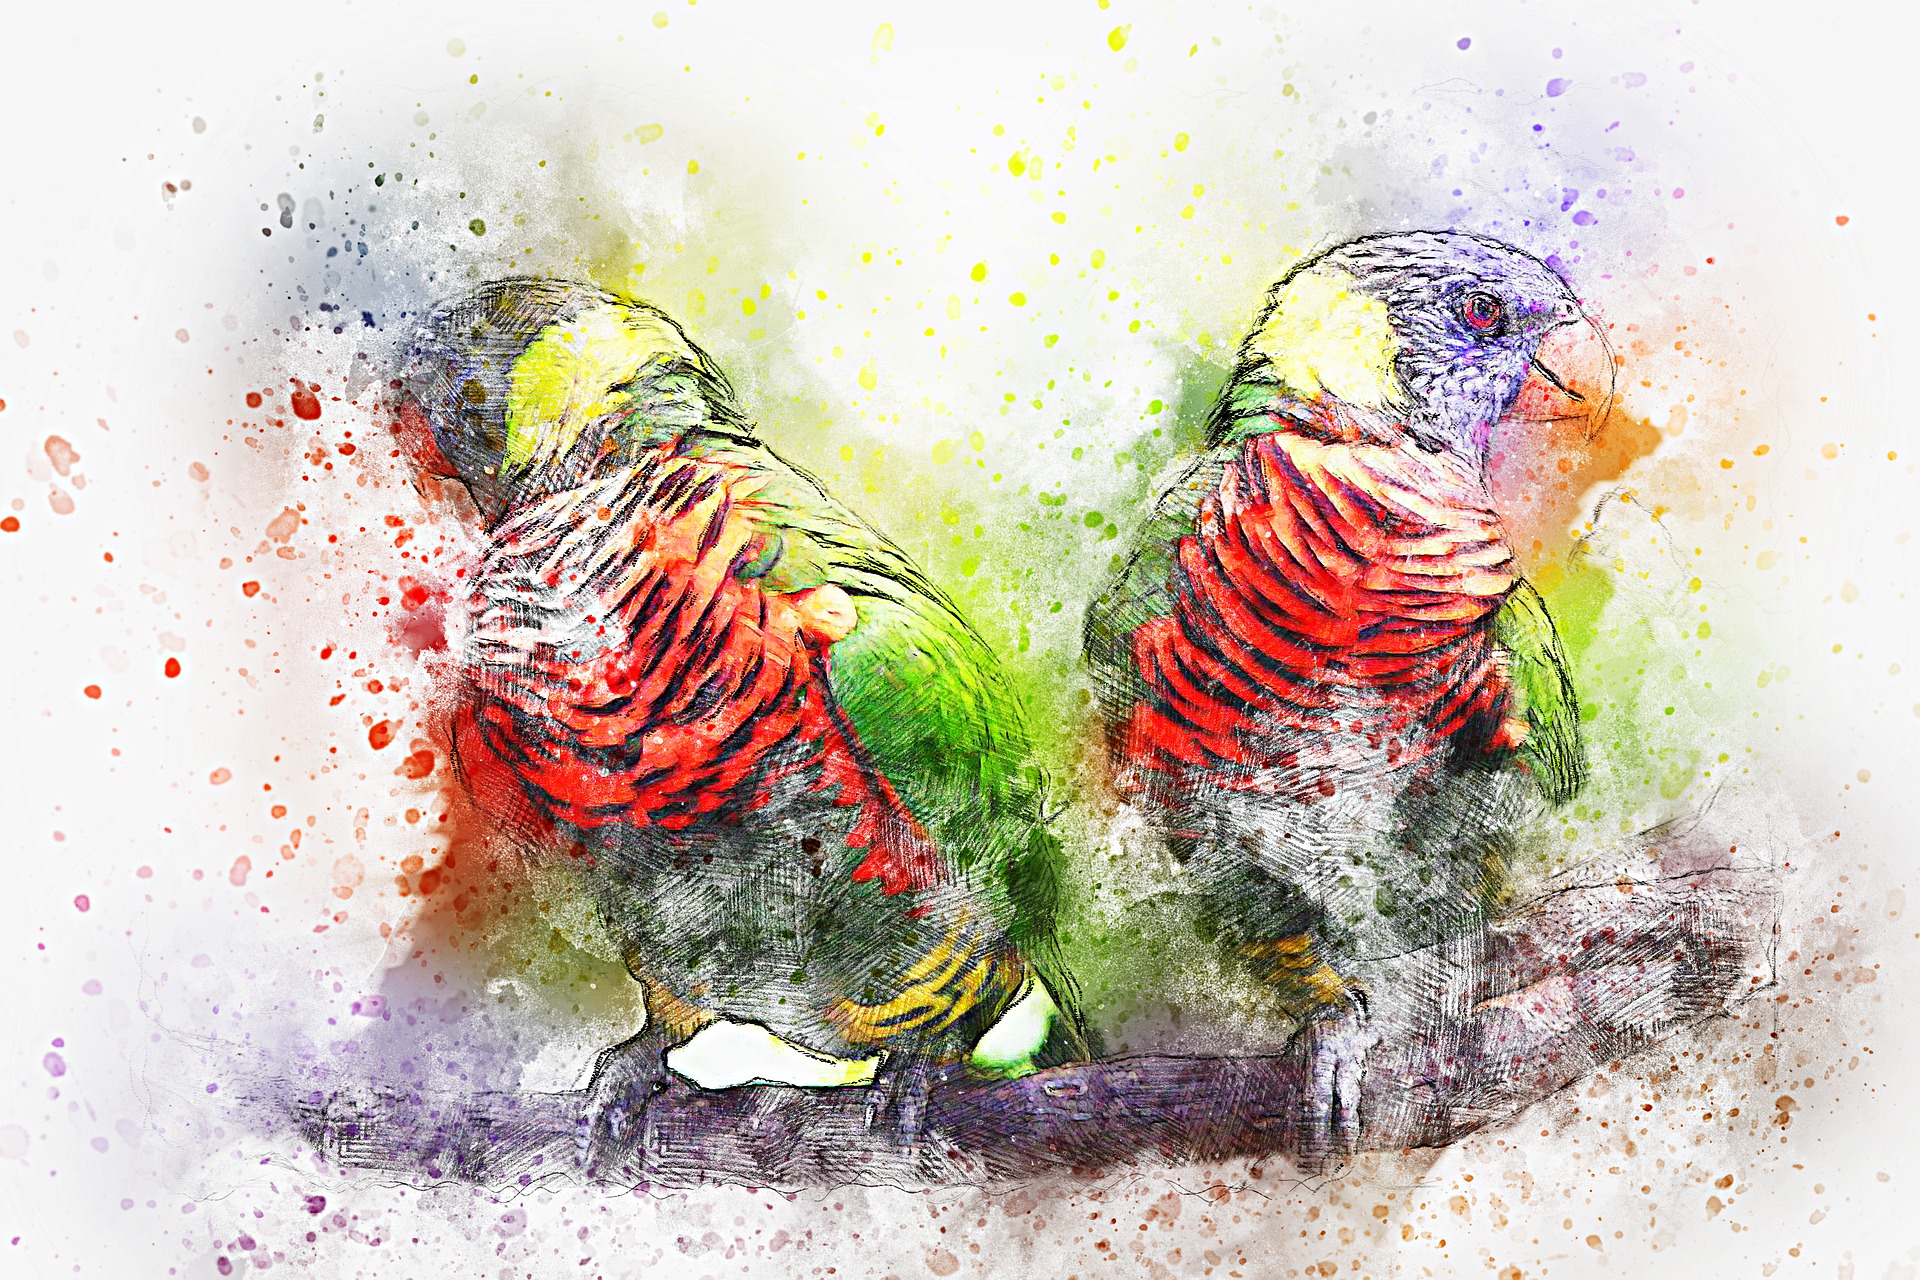 Rainbow Lorikeet done in watercolor and paint splash on a branch by ractapopulous